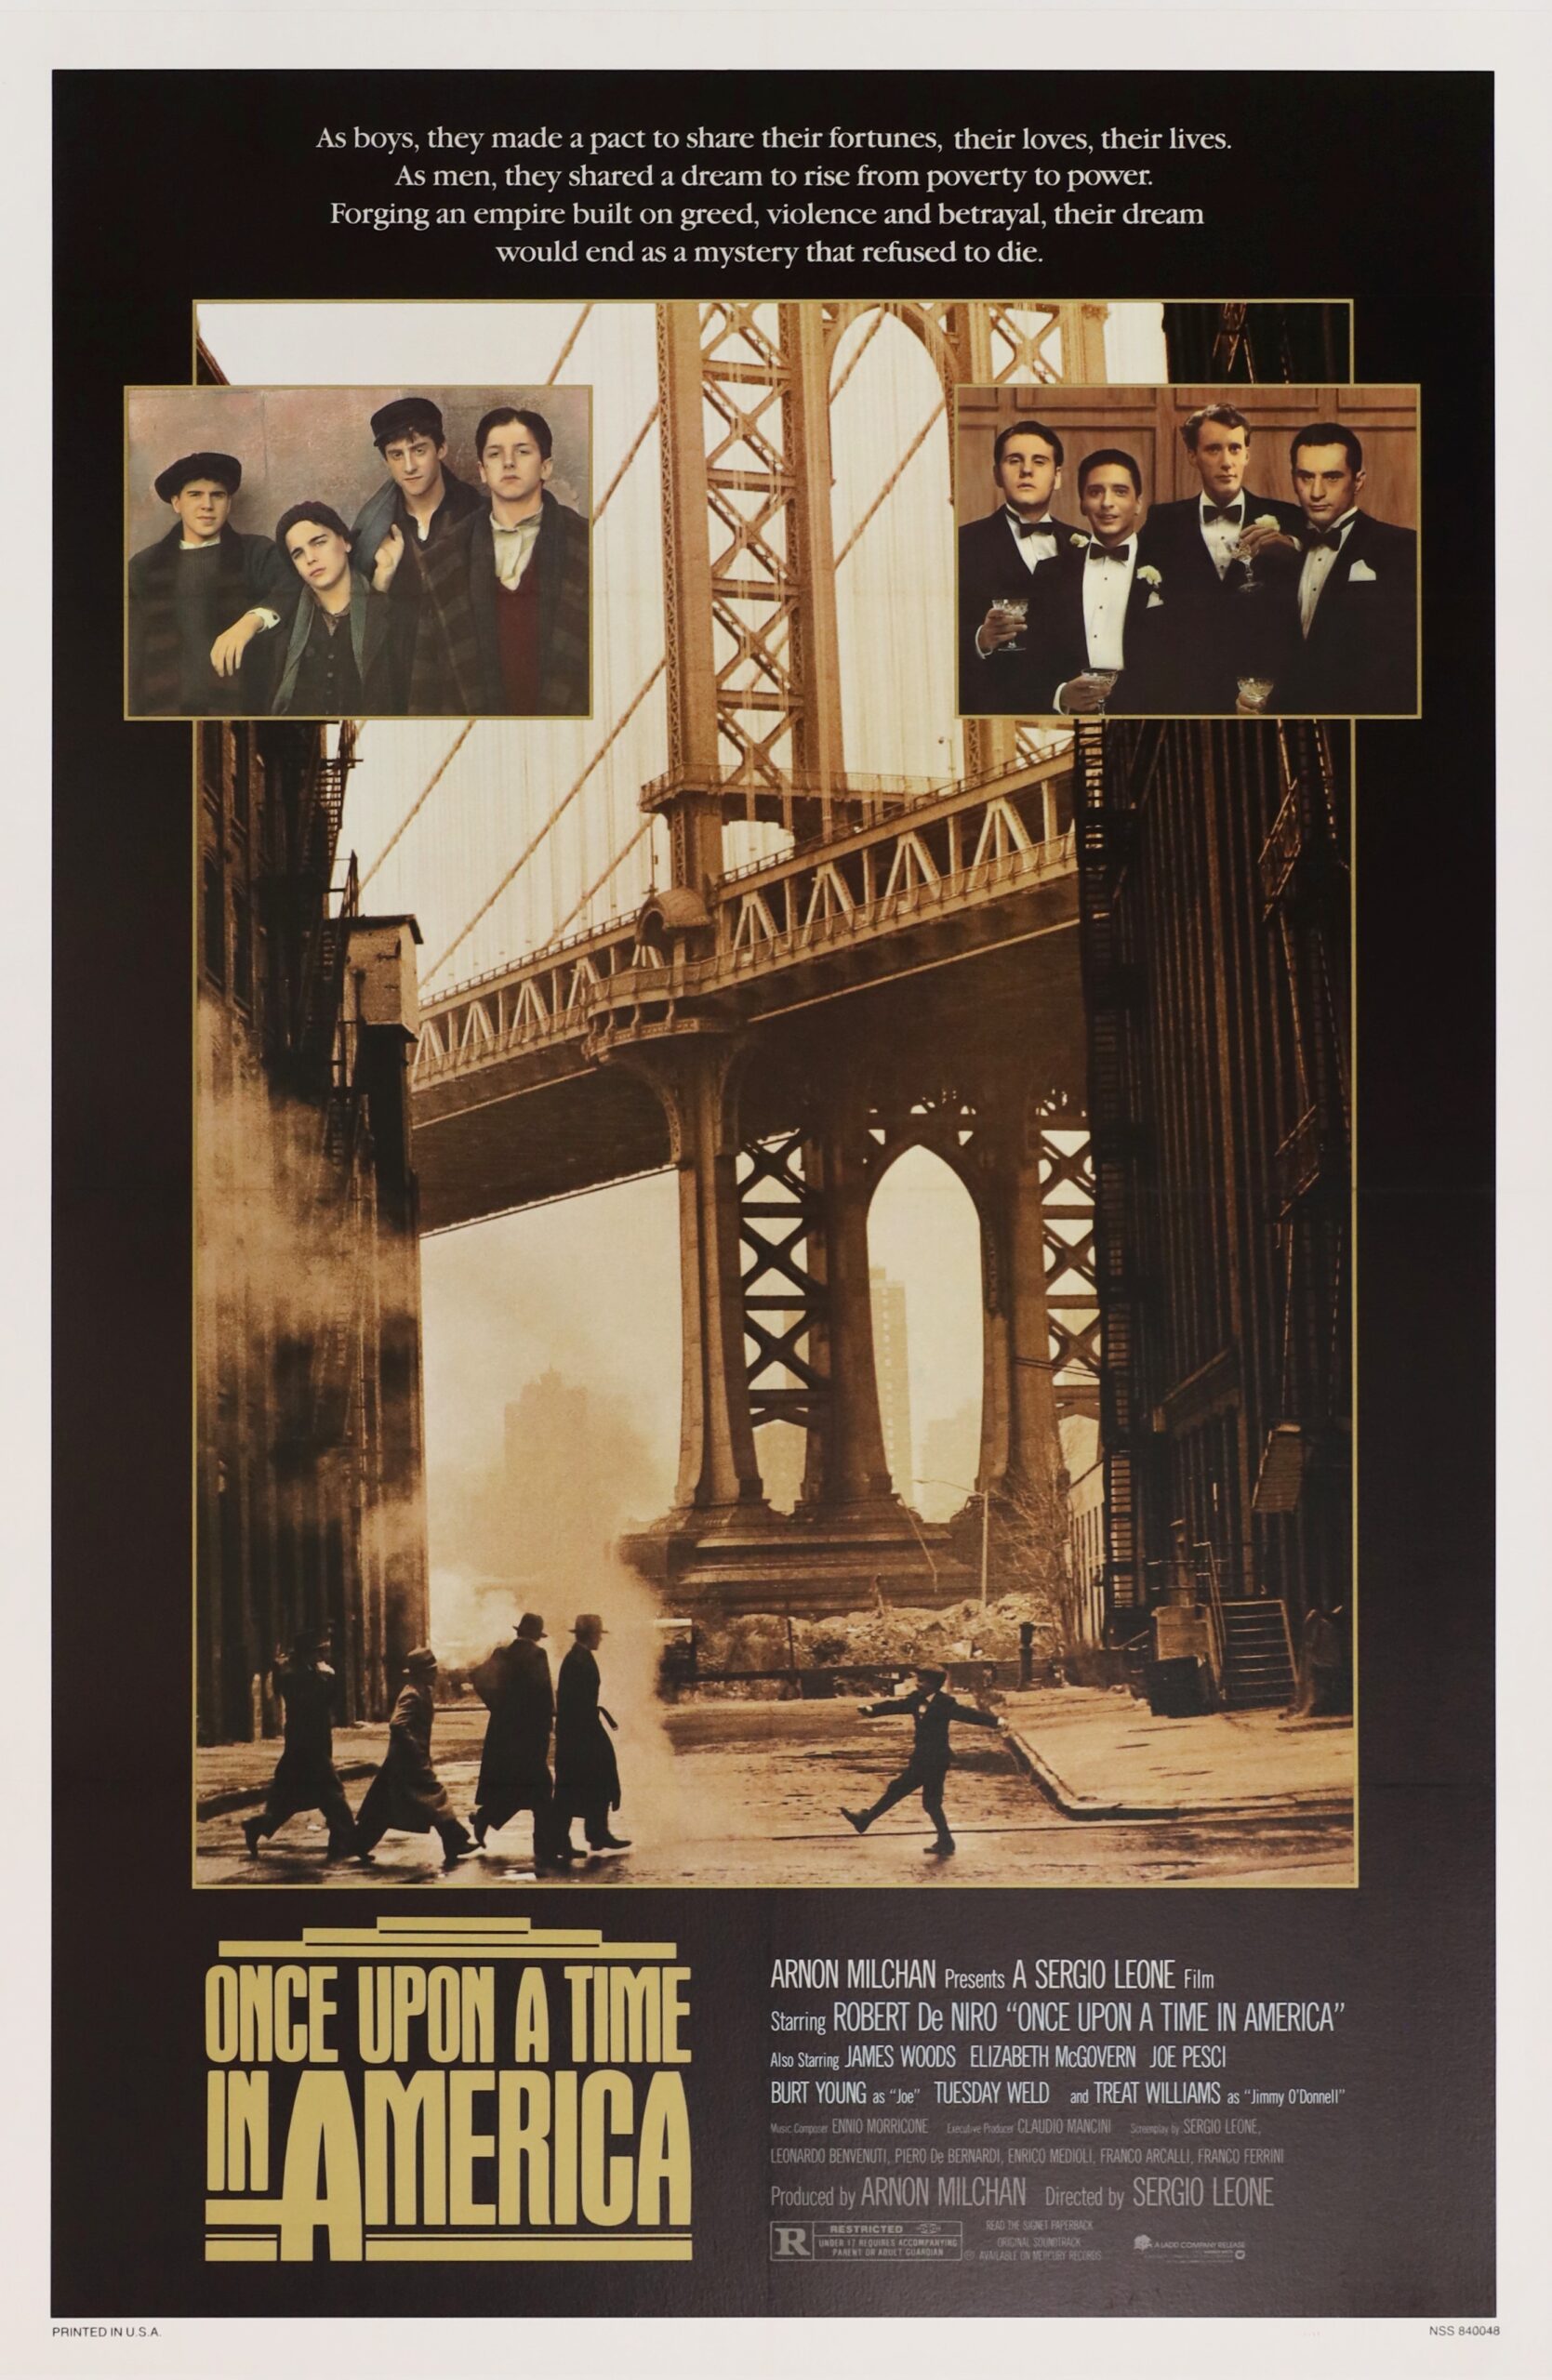 Vintage original US One Sheet cinema poster for Once Upon A Time in America.